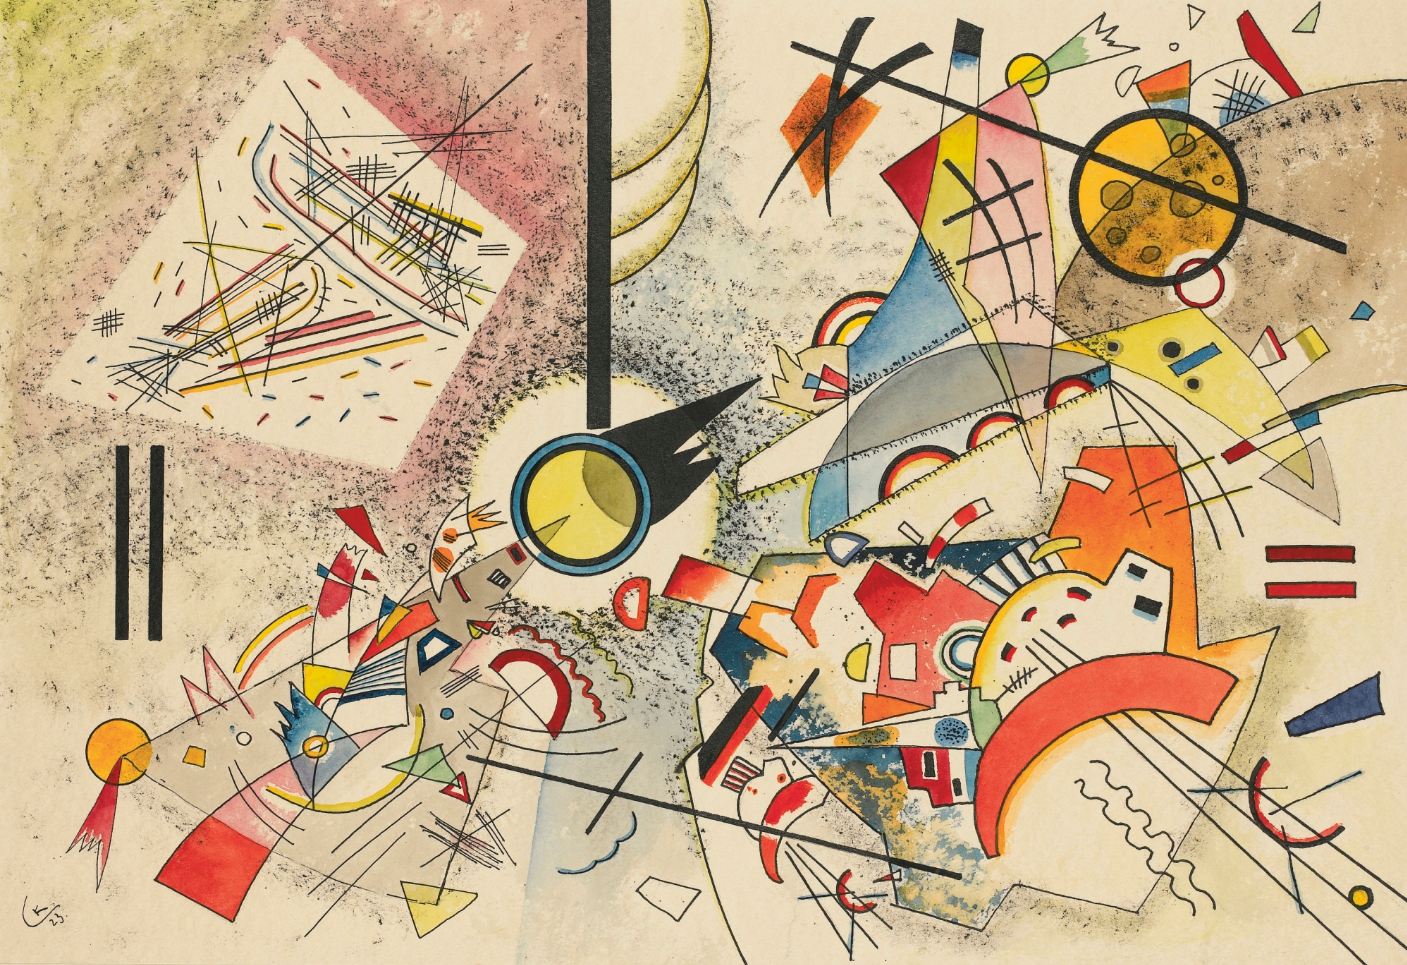 Wassily Kandinsky, 'No TItle'. 1923, journal of wild culture, ©2020